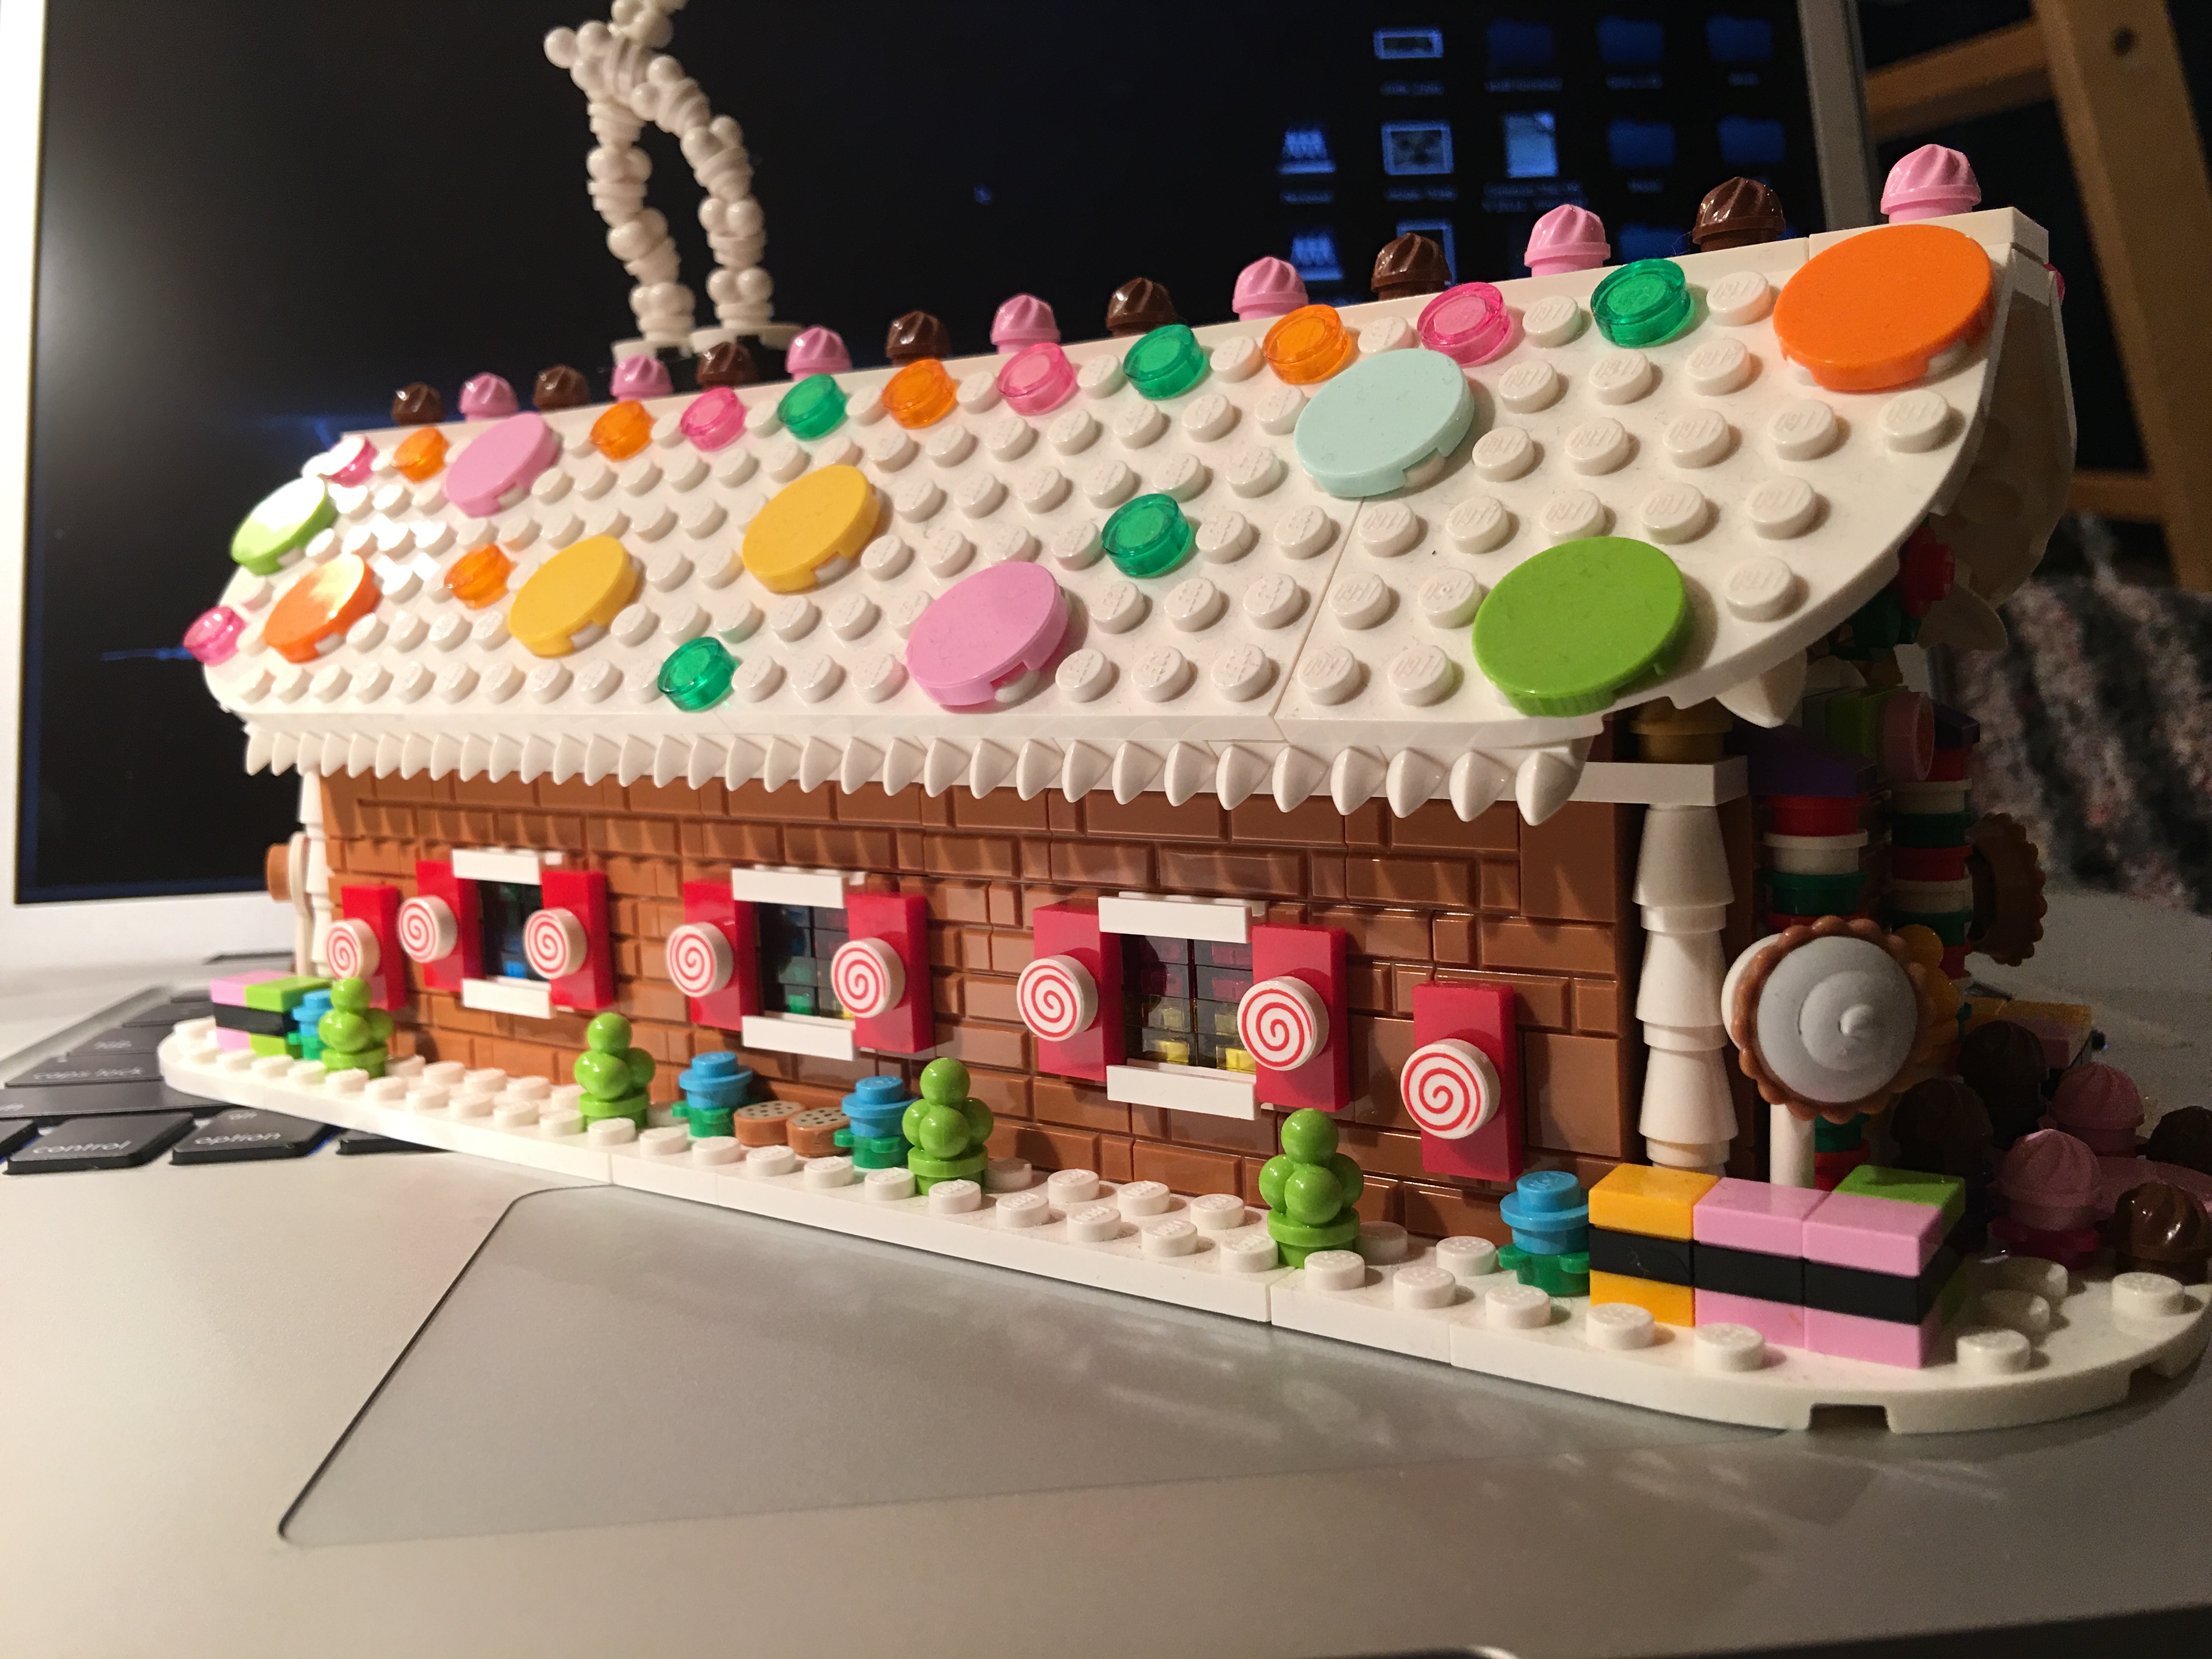 LEGO Moc Gingerbread House by The Allergy Chef